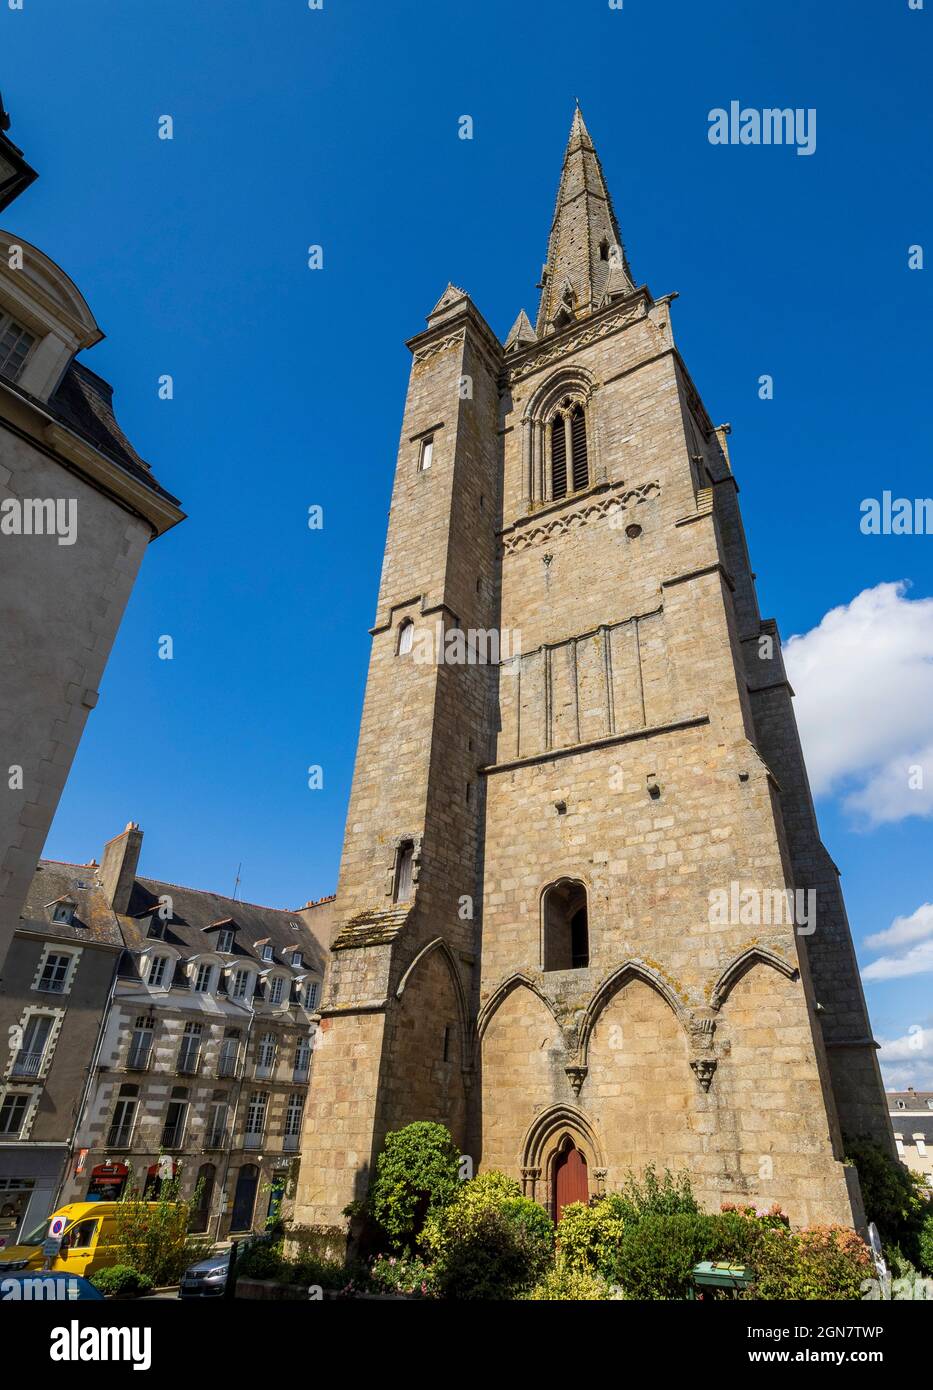 The bell tower, Saint-Sauveur abbey, Redon (35600), Brittany, France. Stock Photo